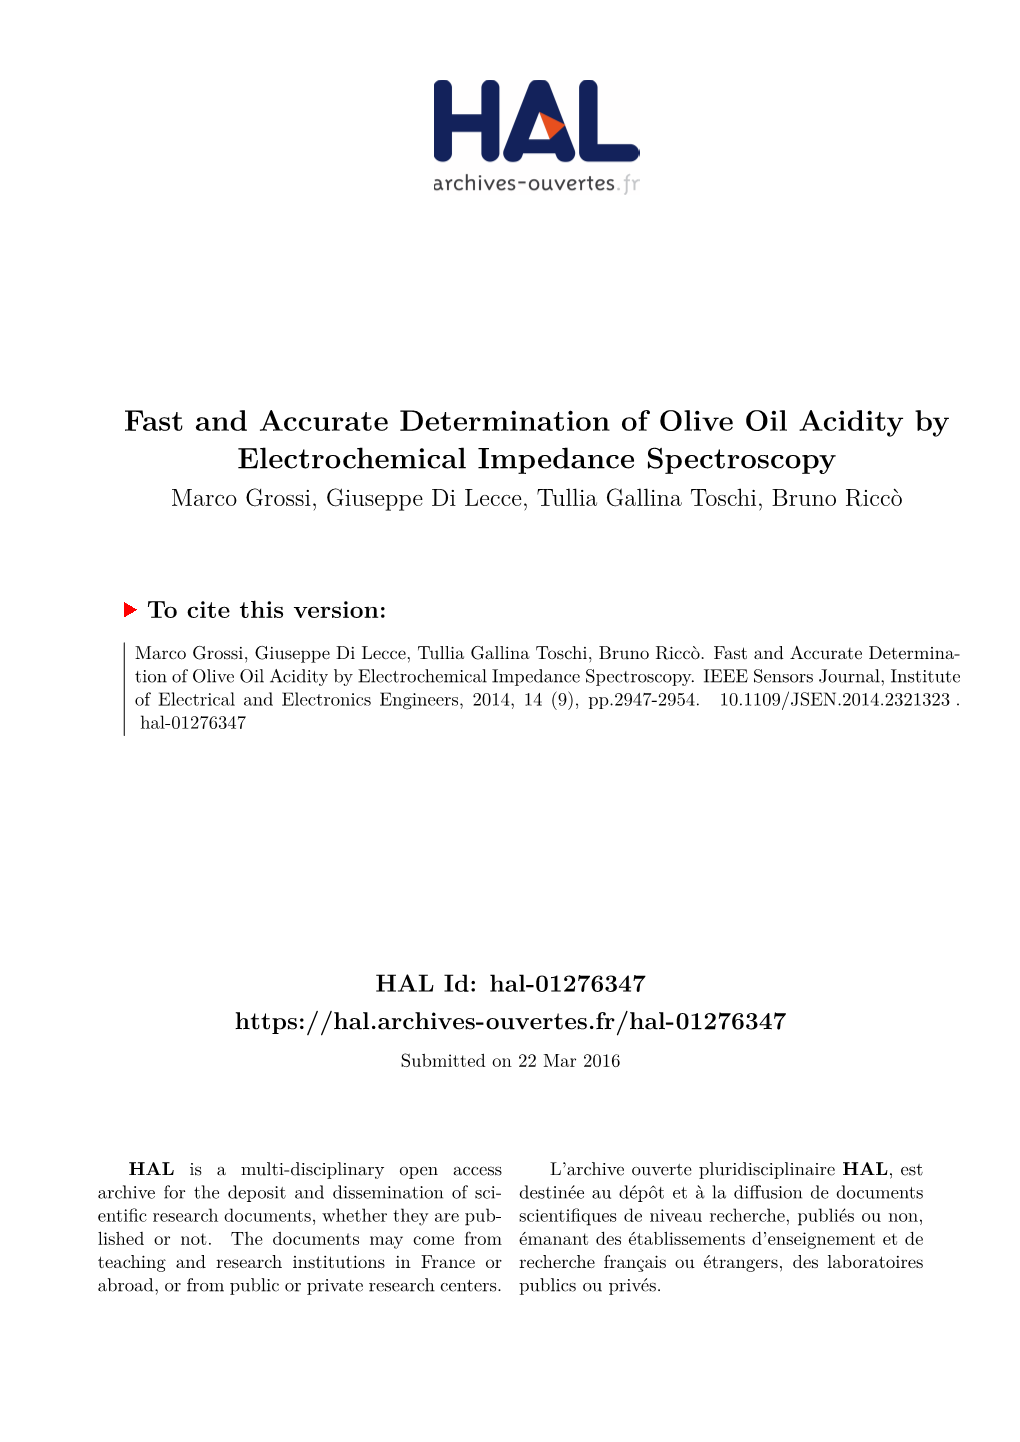 Fast and Accurate Determination of Olive Oil Acidity by Electrochemical Impedance Spectroscopy Marco Grossi, Giuseppe Di Lecce, Tullia Gallina Toschi, Bruno Riccò